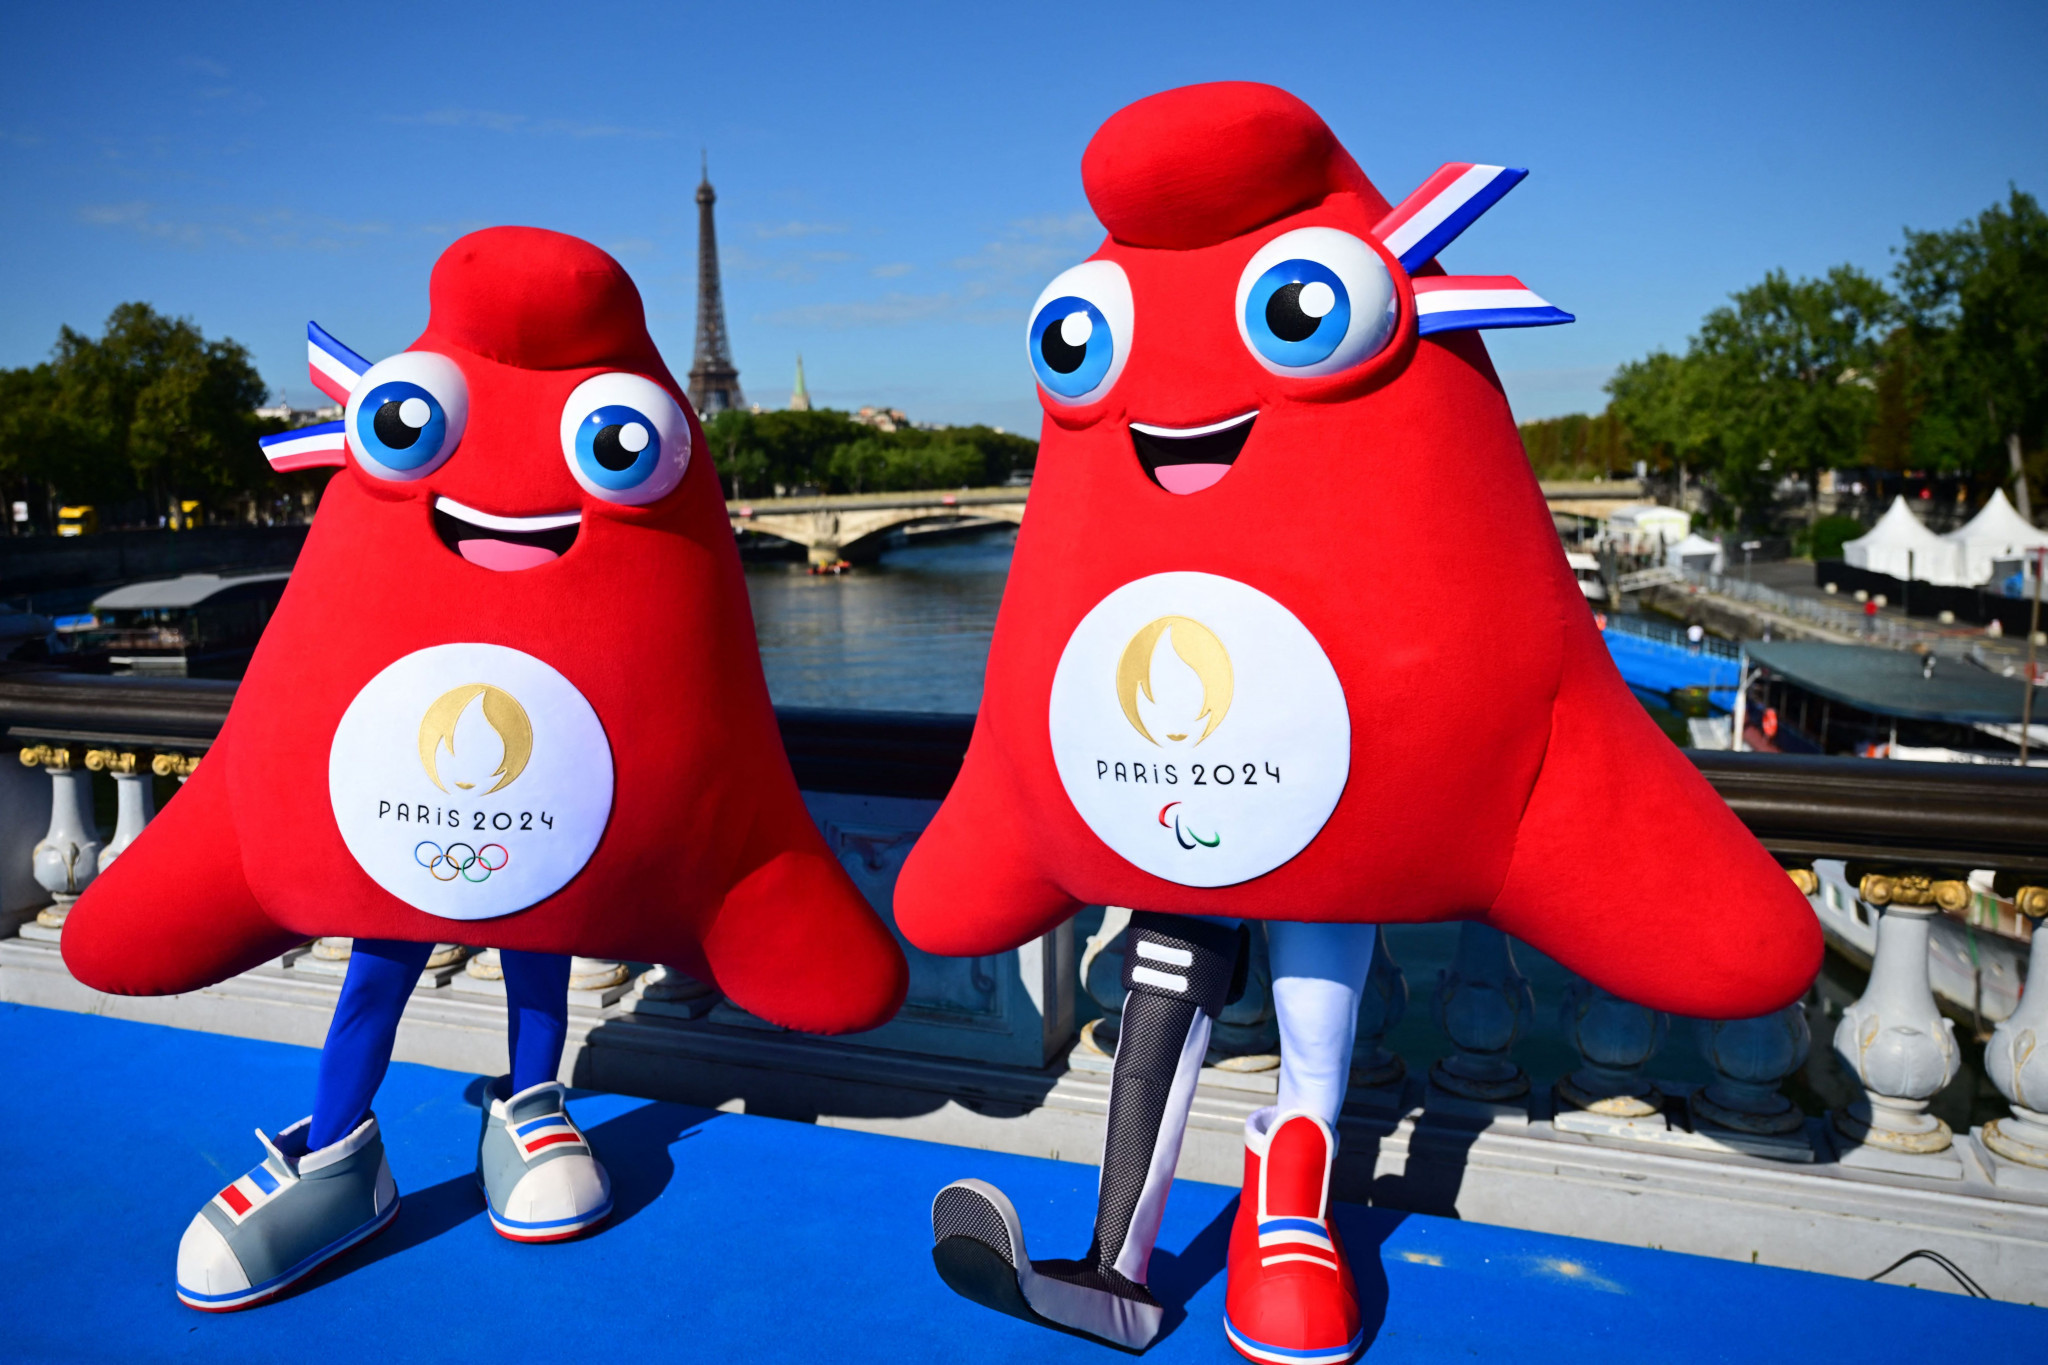 Olympic Phryges mascots pose for a photograph on the Alexandre III bridge with the Eiffel Tower in the background, © Getty Images